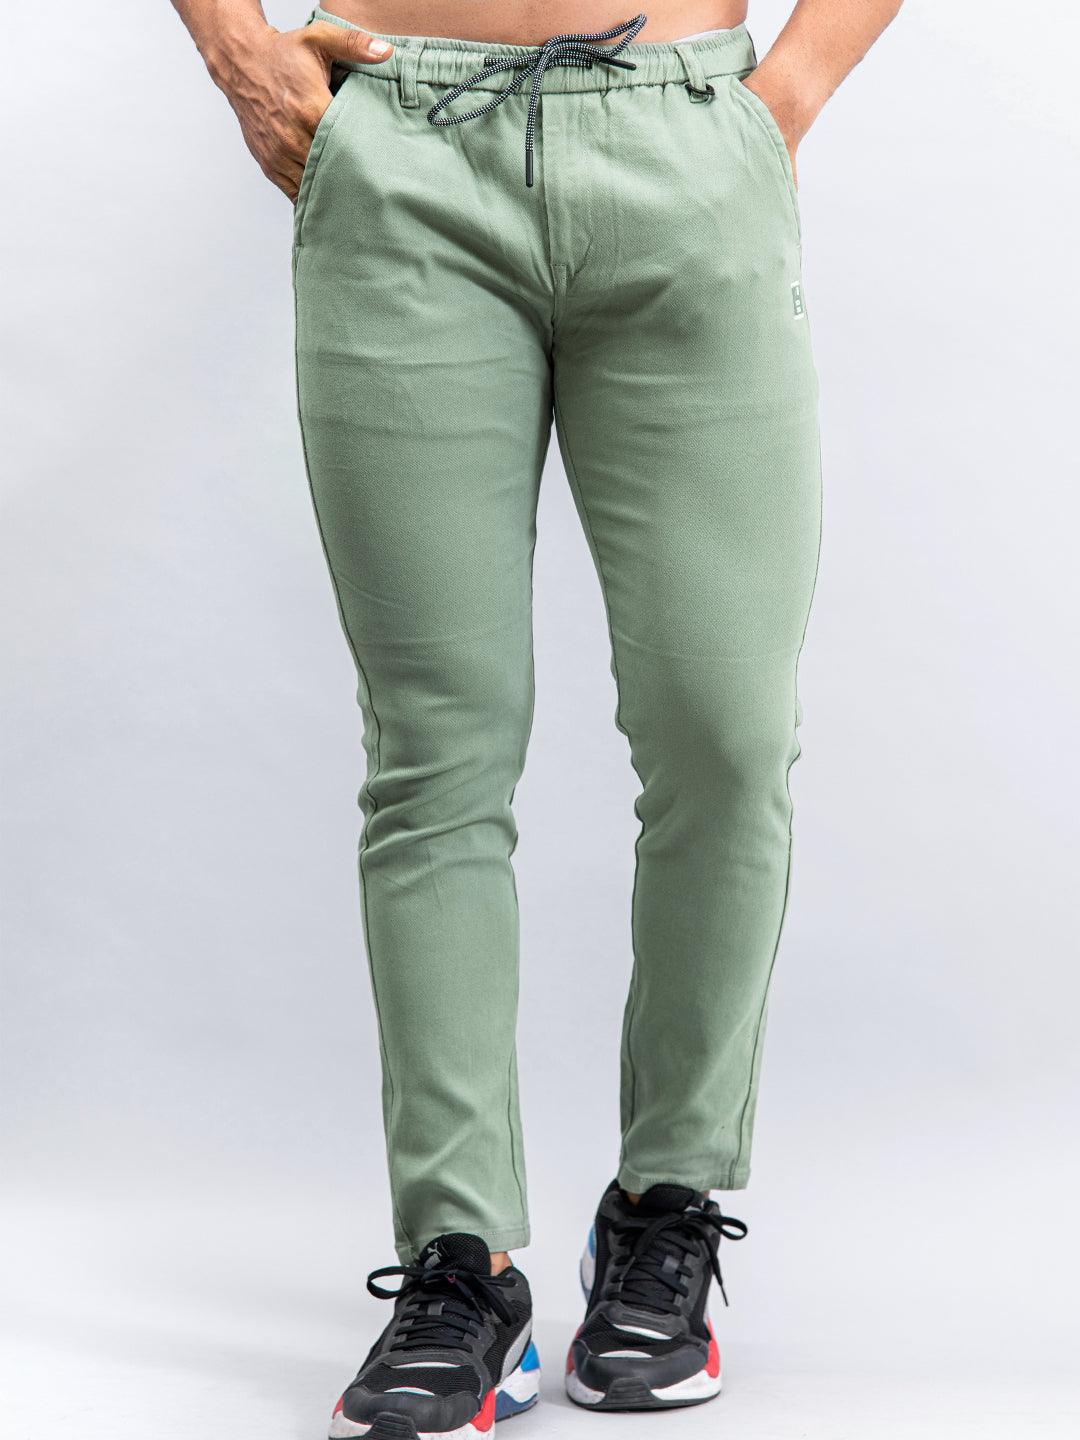 Solid Green Joggers For Men